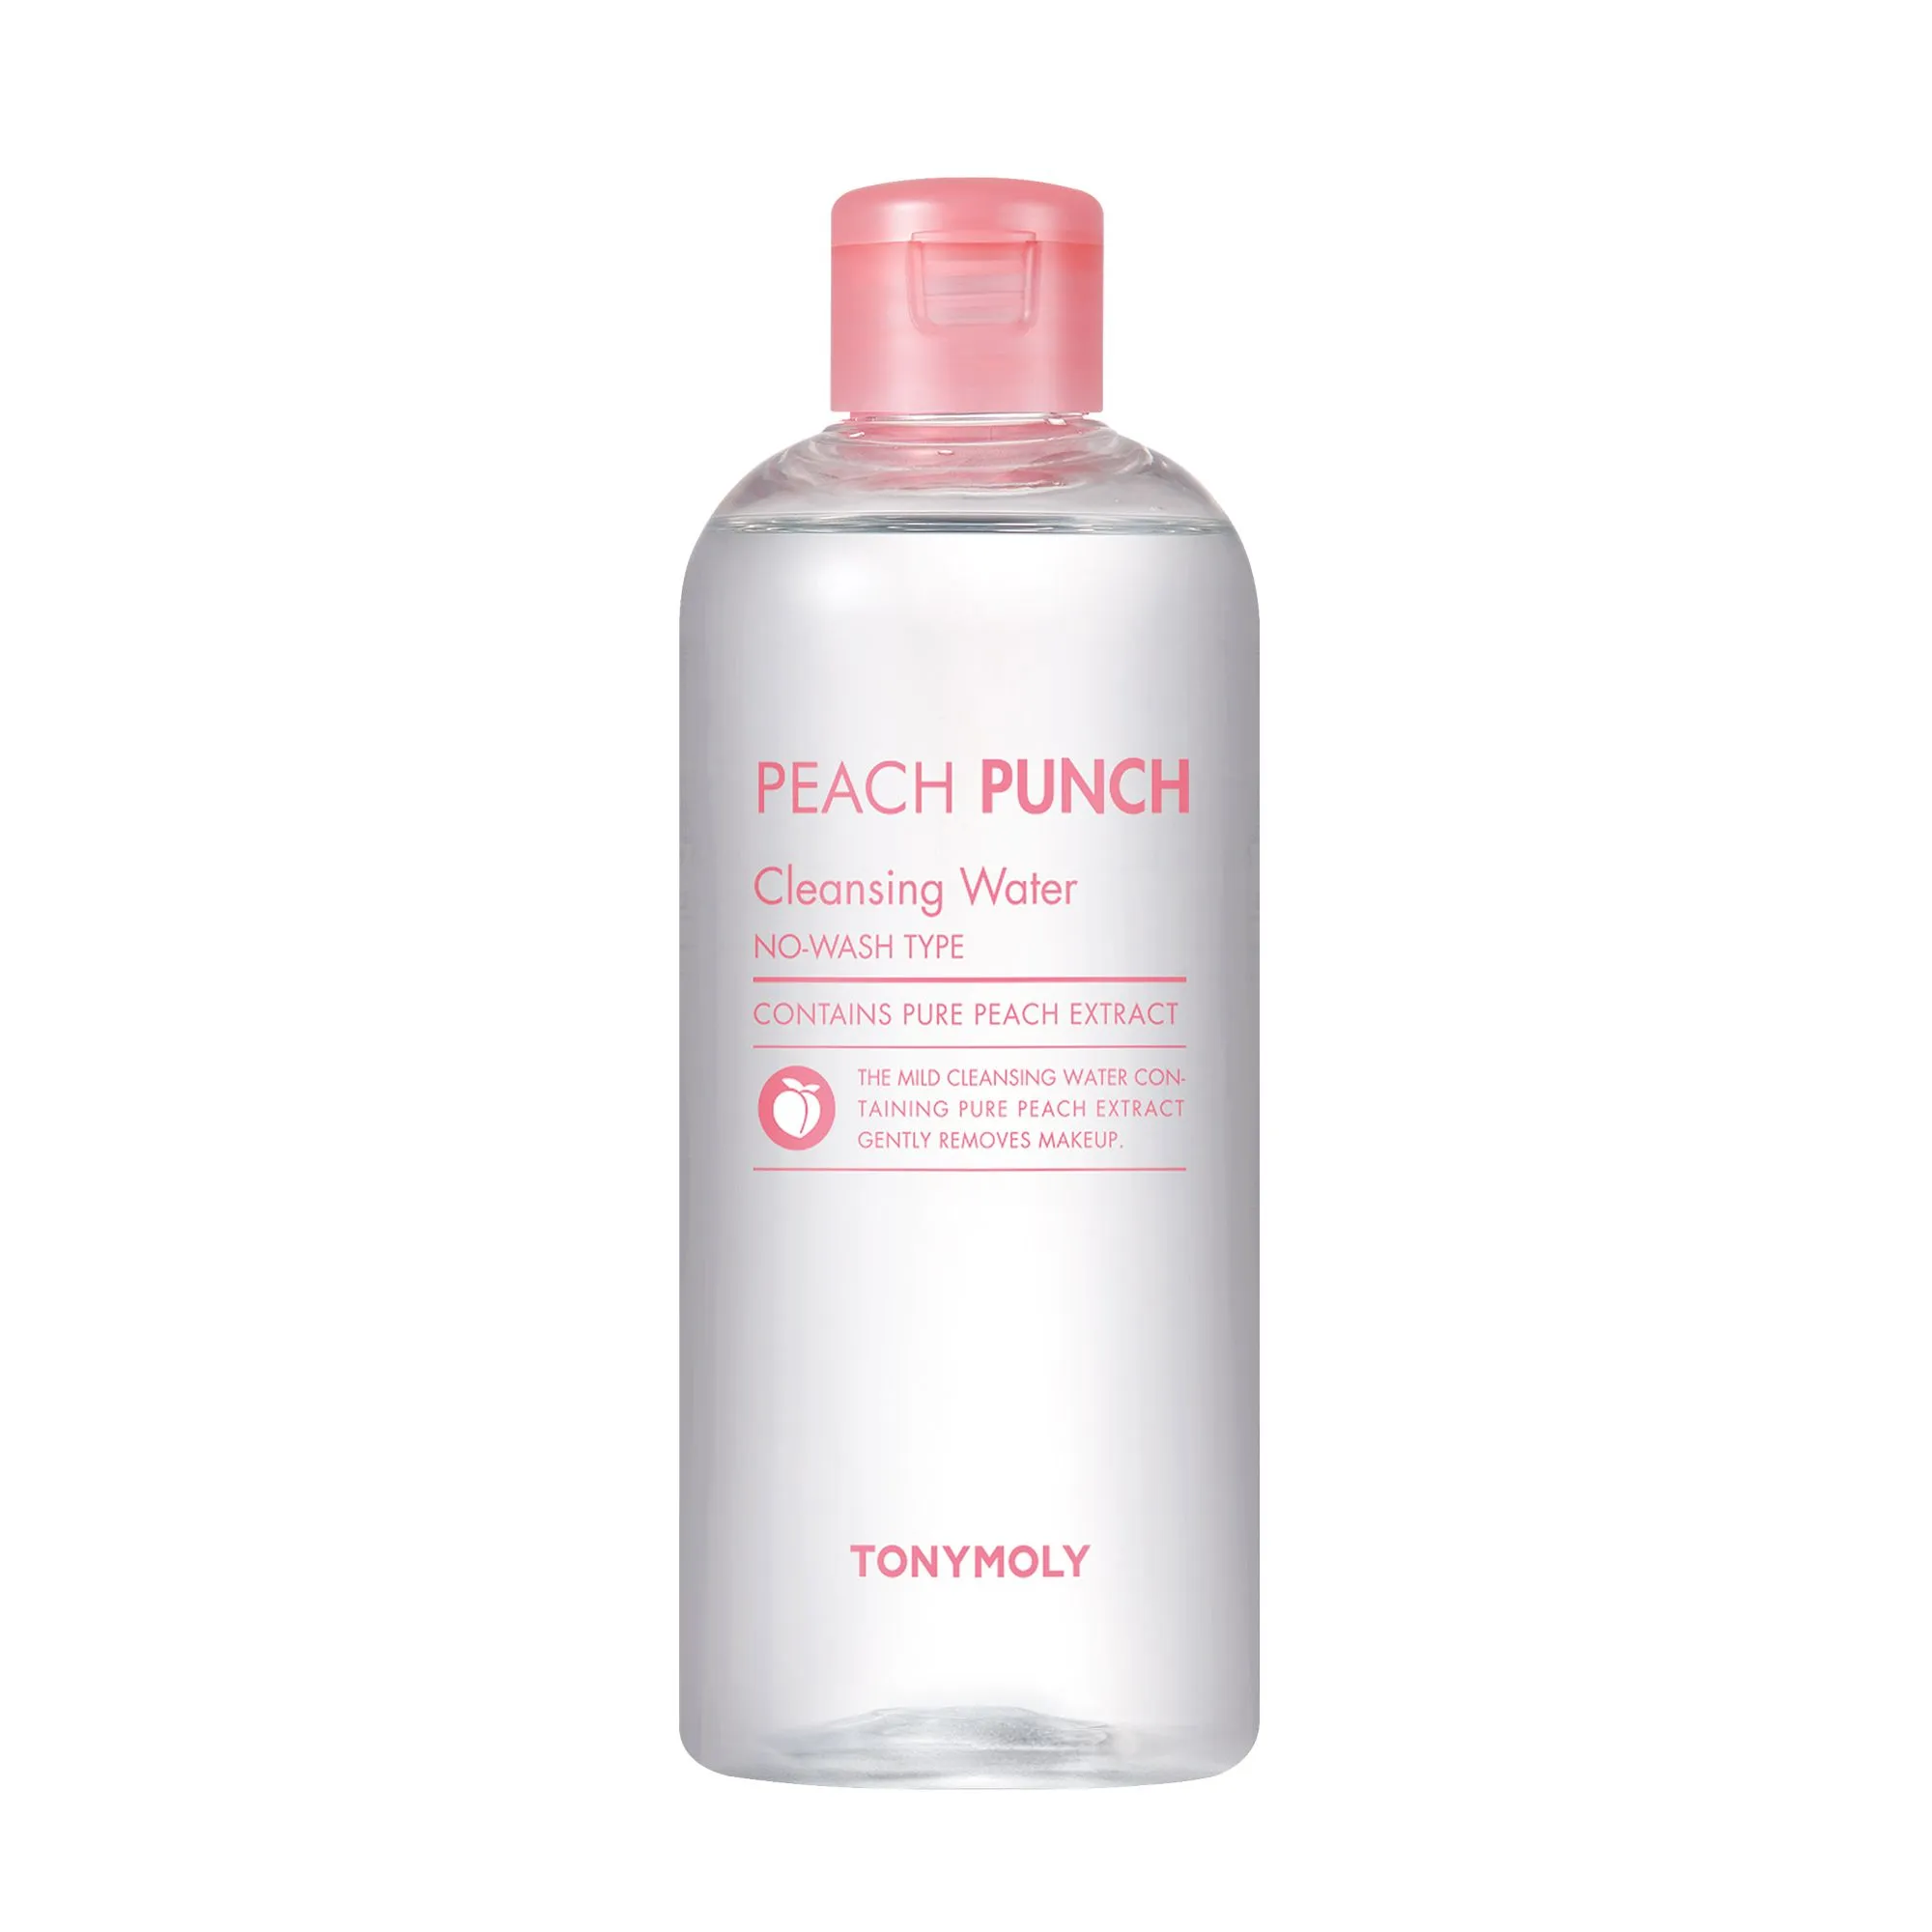 Tony Moly Peach Punch Cleansing Water 300 ml 1×300 ml